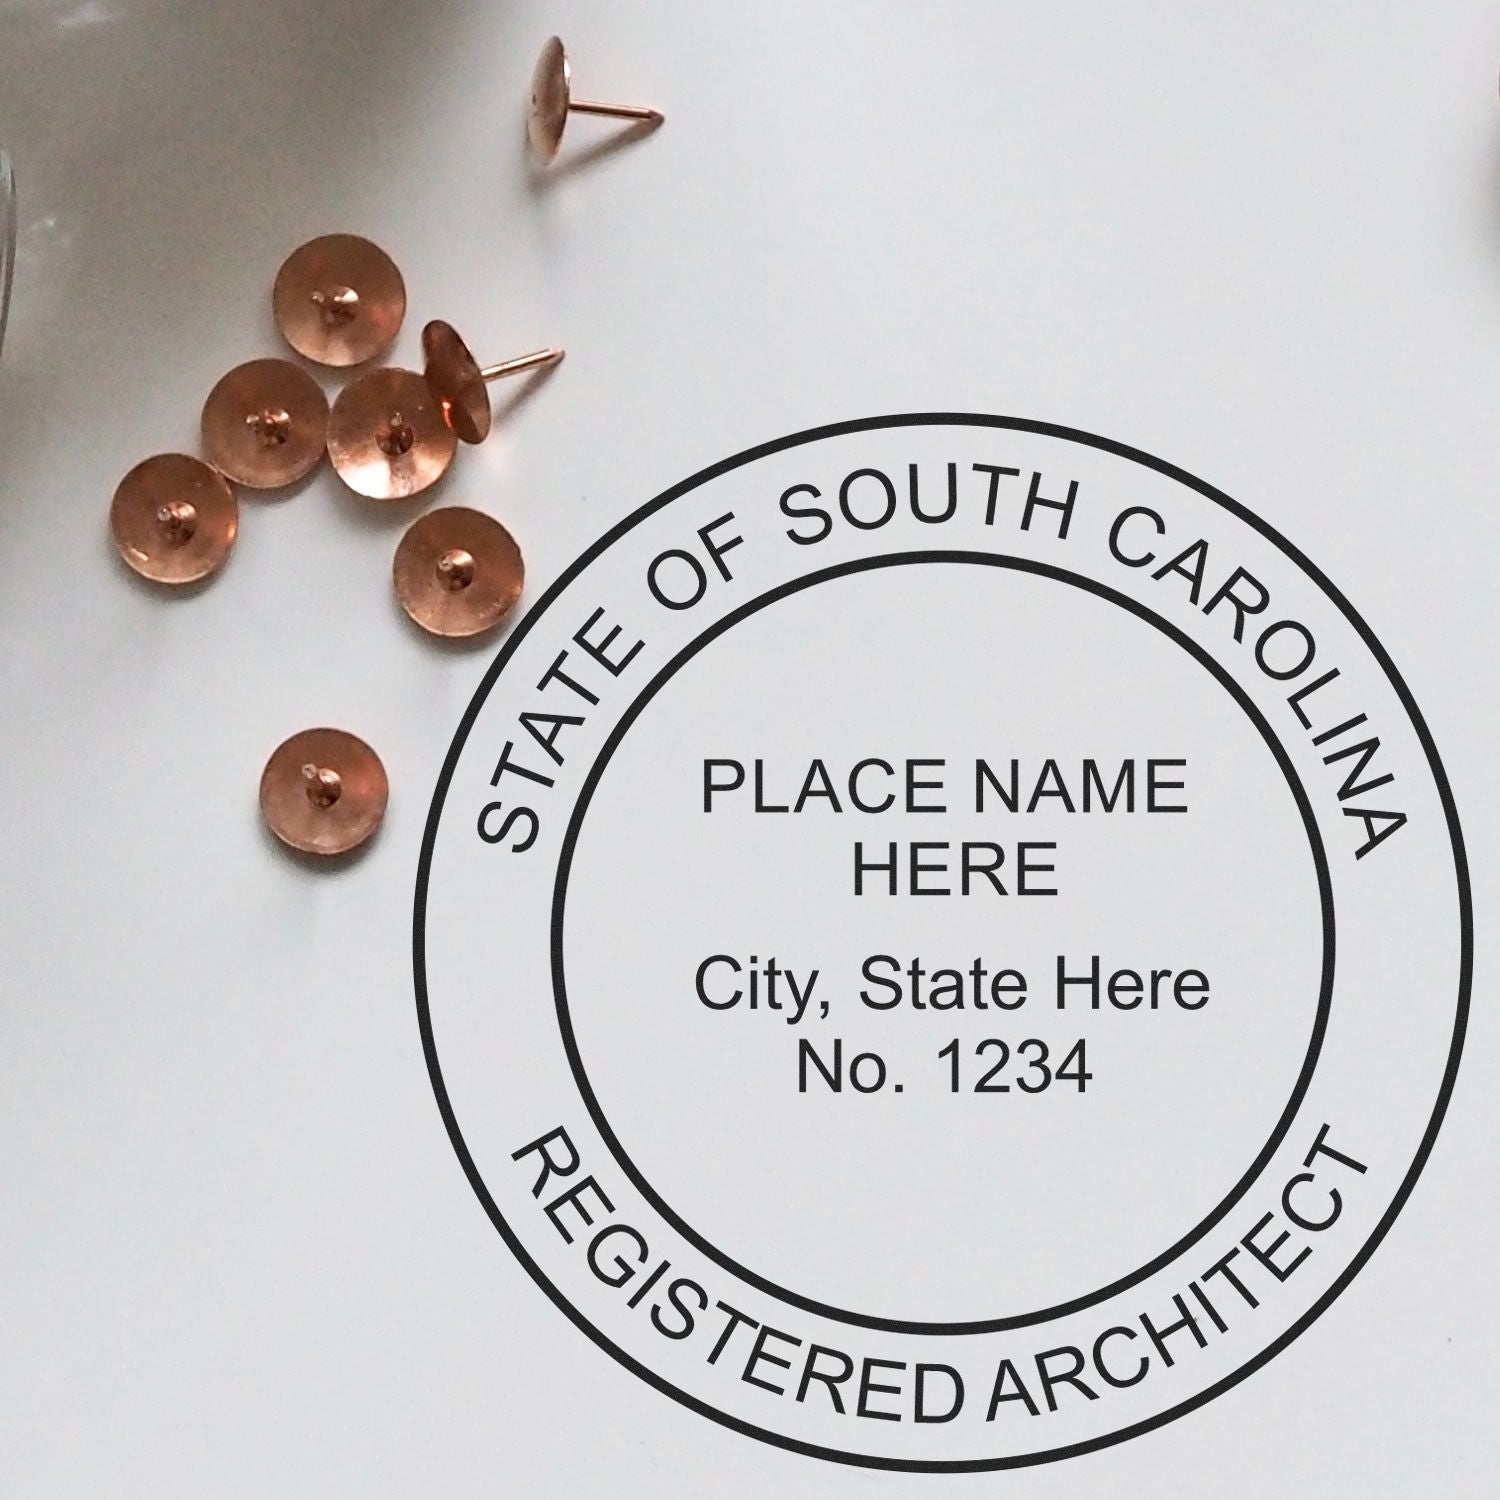 Stamping Your Authority: Impressive South Carolina Architect Stamp Designs Feature Image